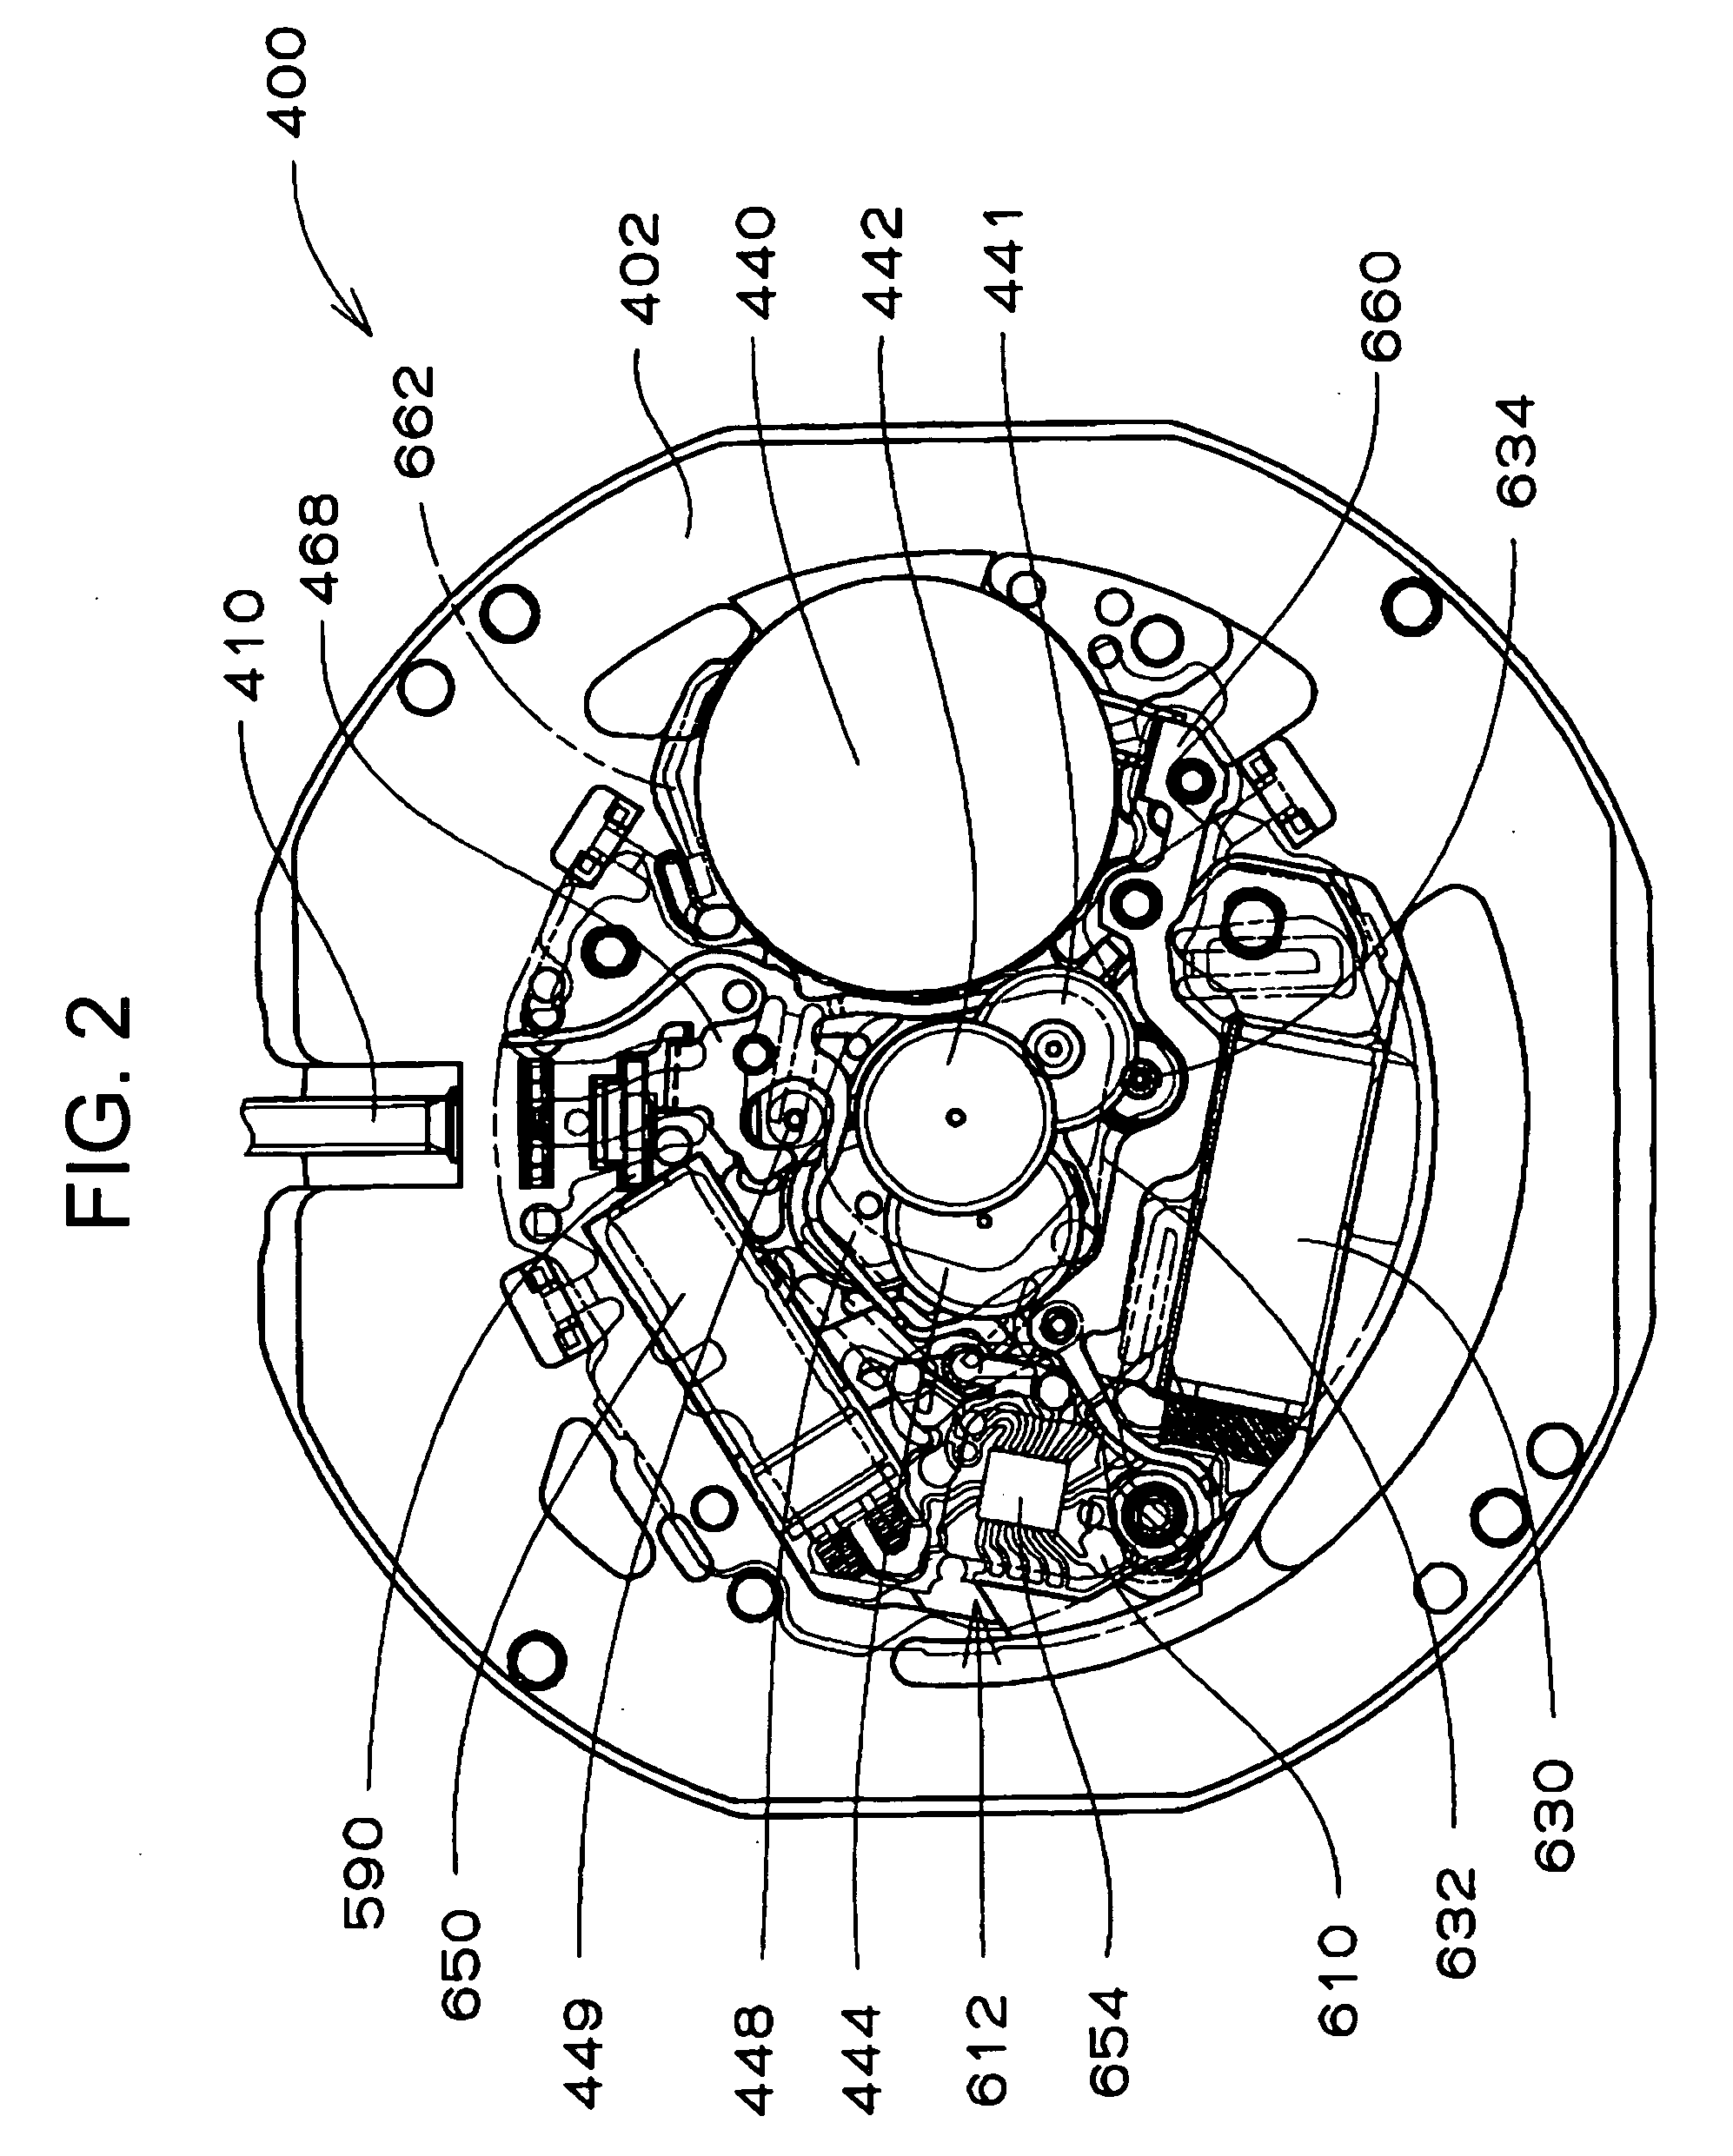 Timepiece equipped with calendar mechanism including first and second date indicators